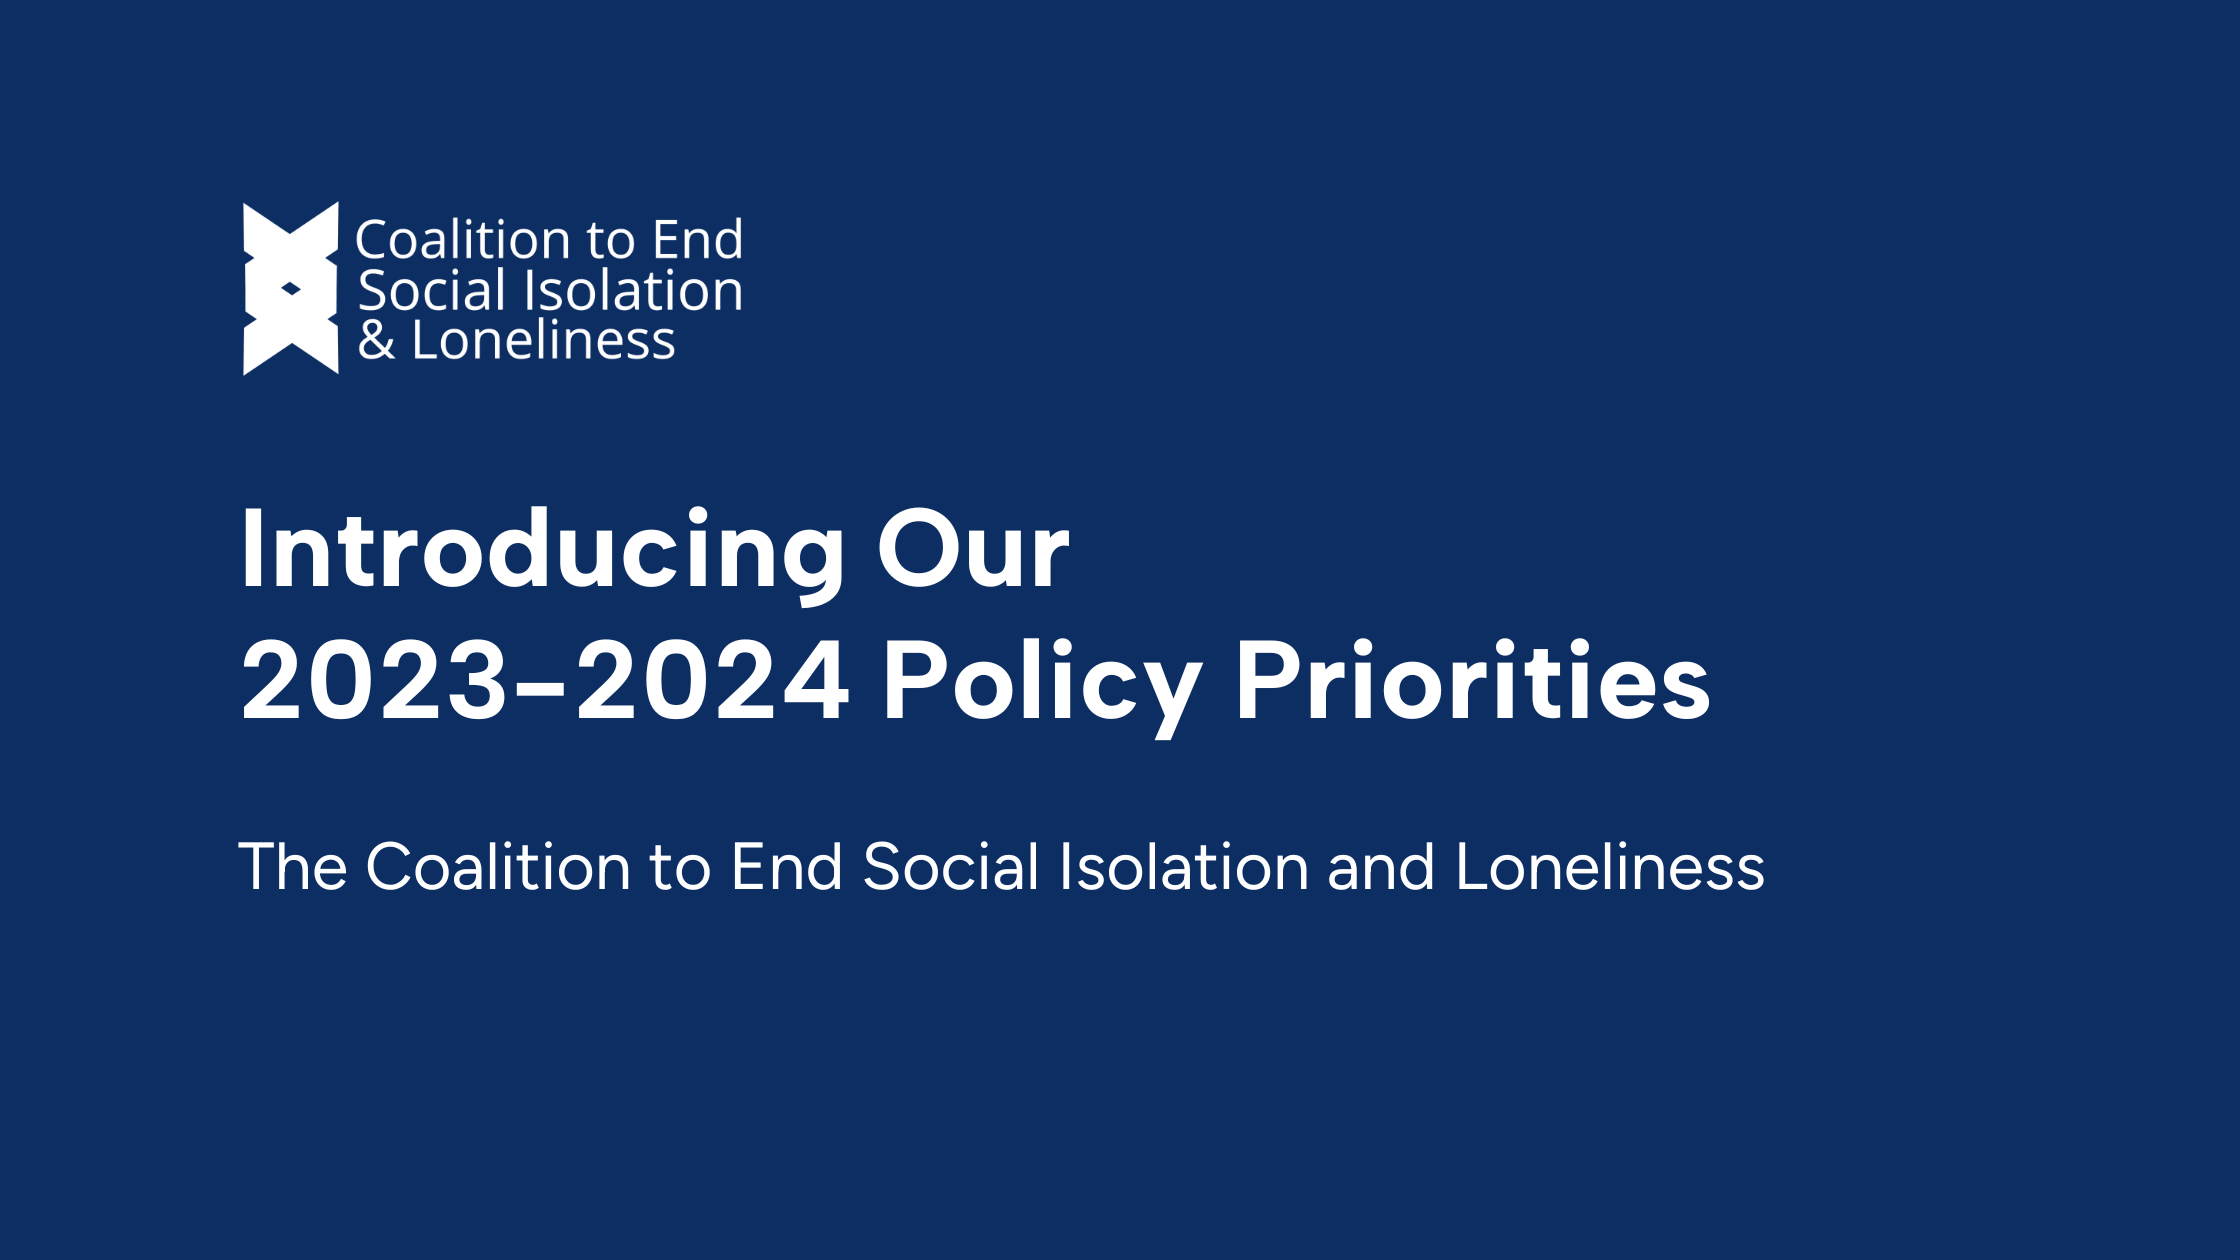 Introducing Our 2023-2024 Policy Priorities